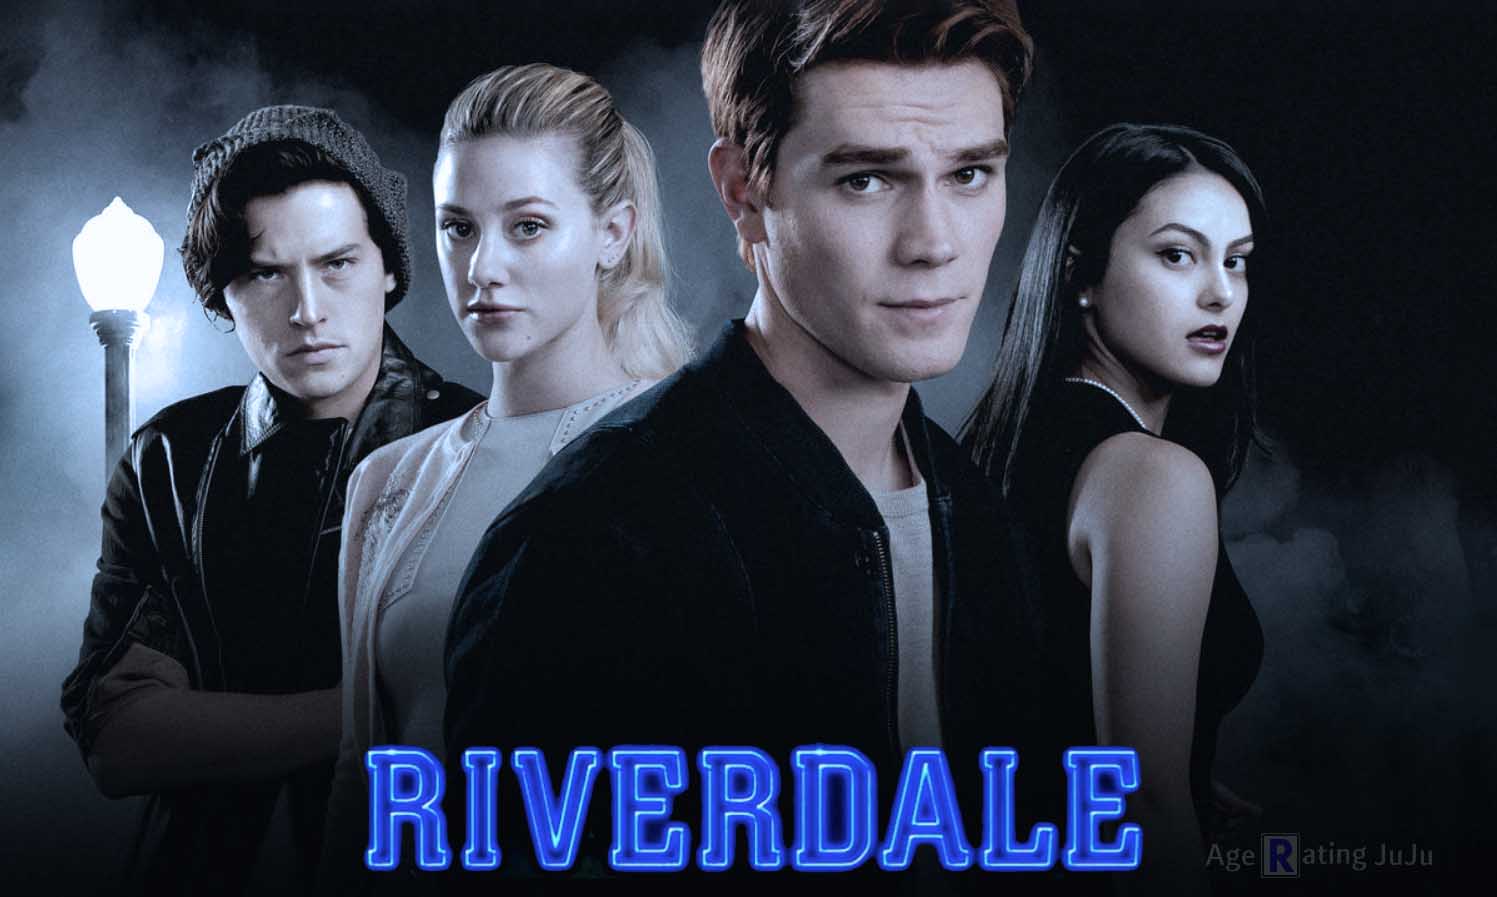 Riverdale Age Rating 2018 netflix TV Show Poster Images and Wallpapers